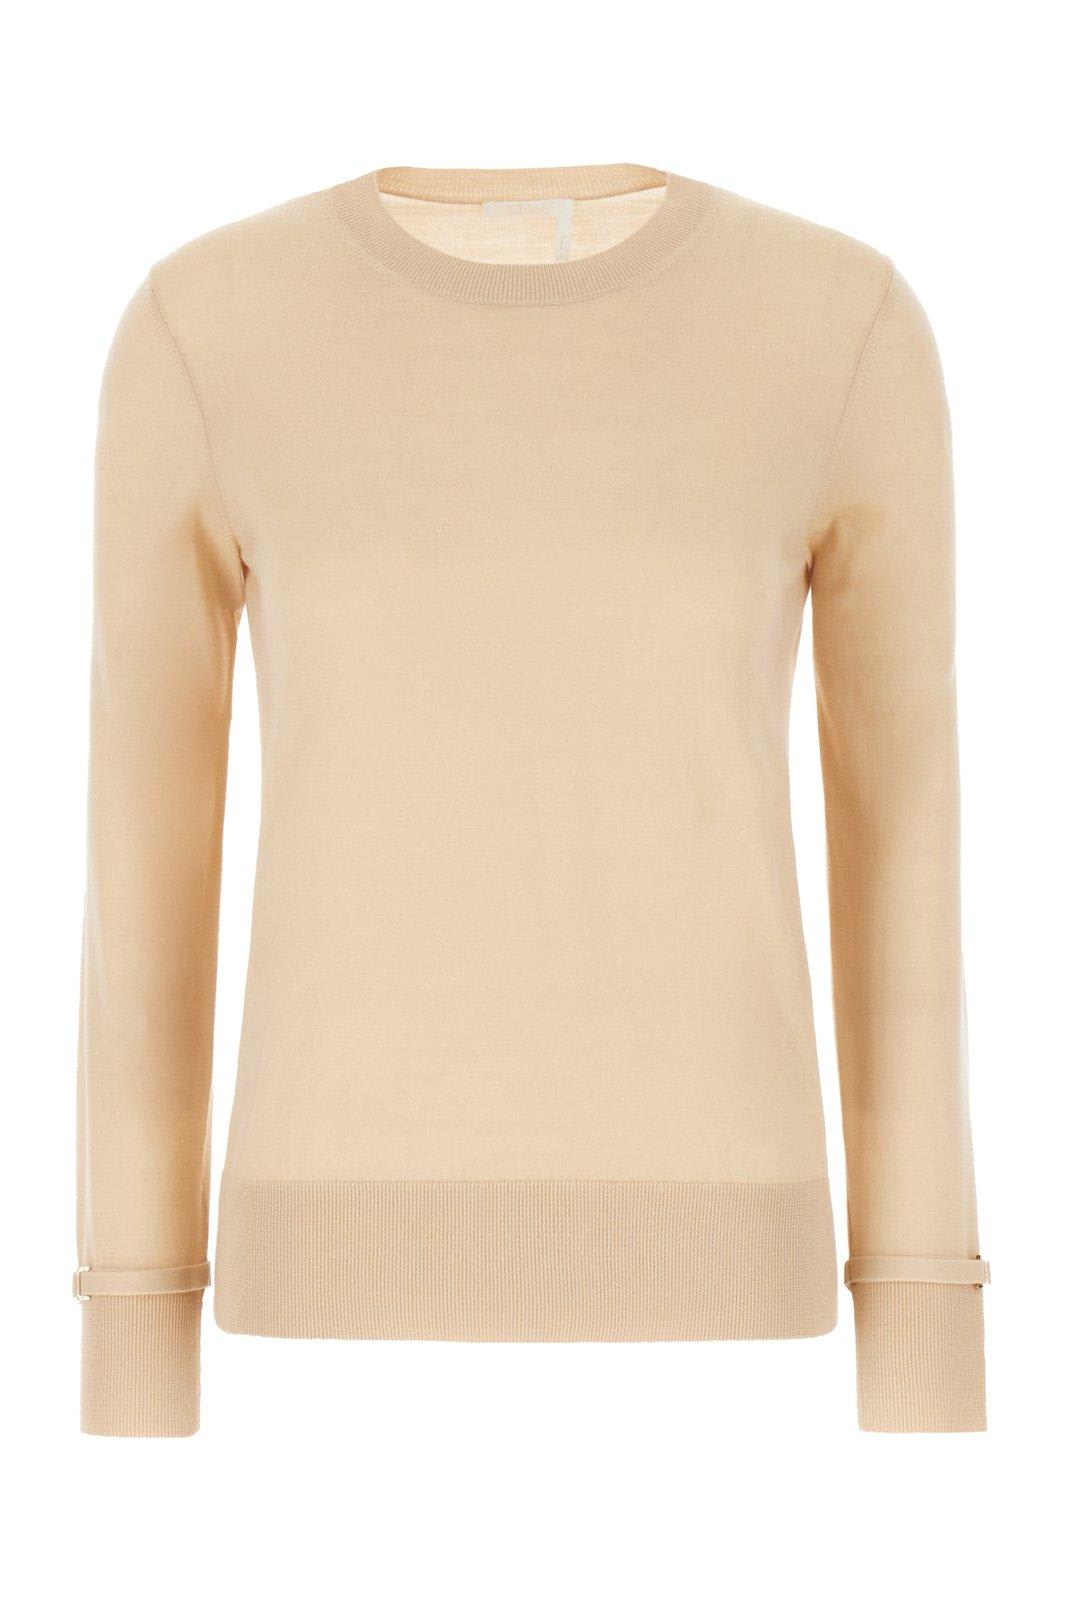 Shop Chloé Crewneck Knitted Jumper In Hot Sand